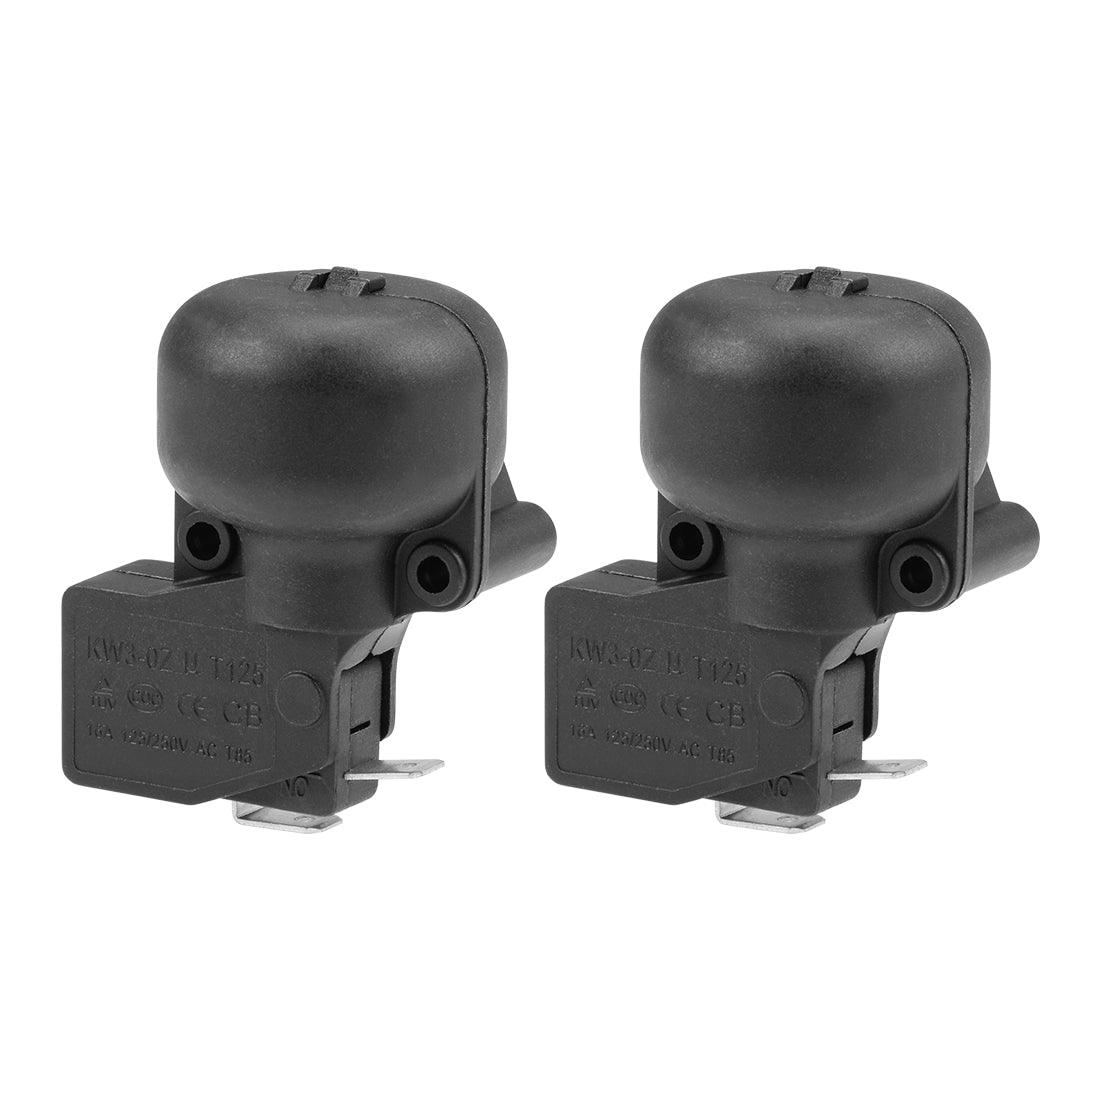 uxcell Uxcell Tip Over Switch AC 125V/250V 16A Anti Tilt Dump Switch for Patio Garden Heaters Electric Fan 2pcs